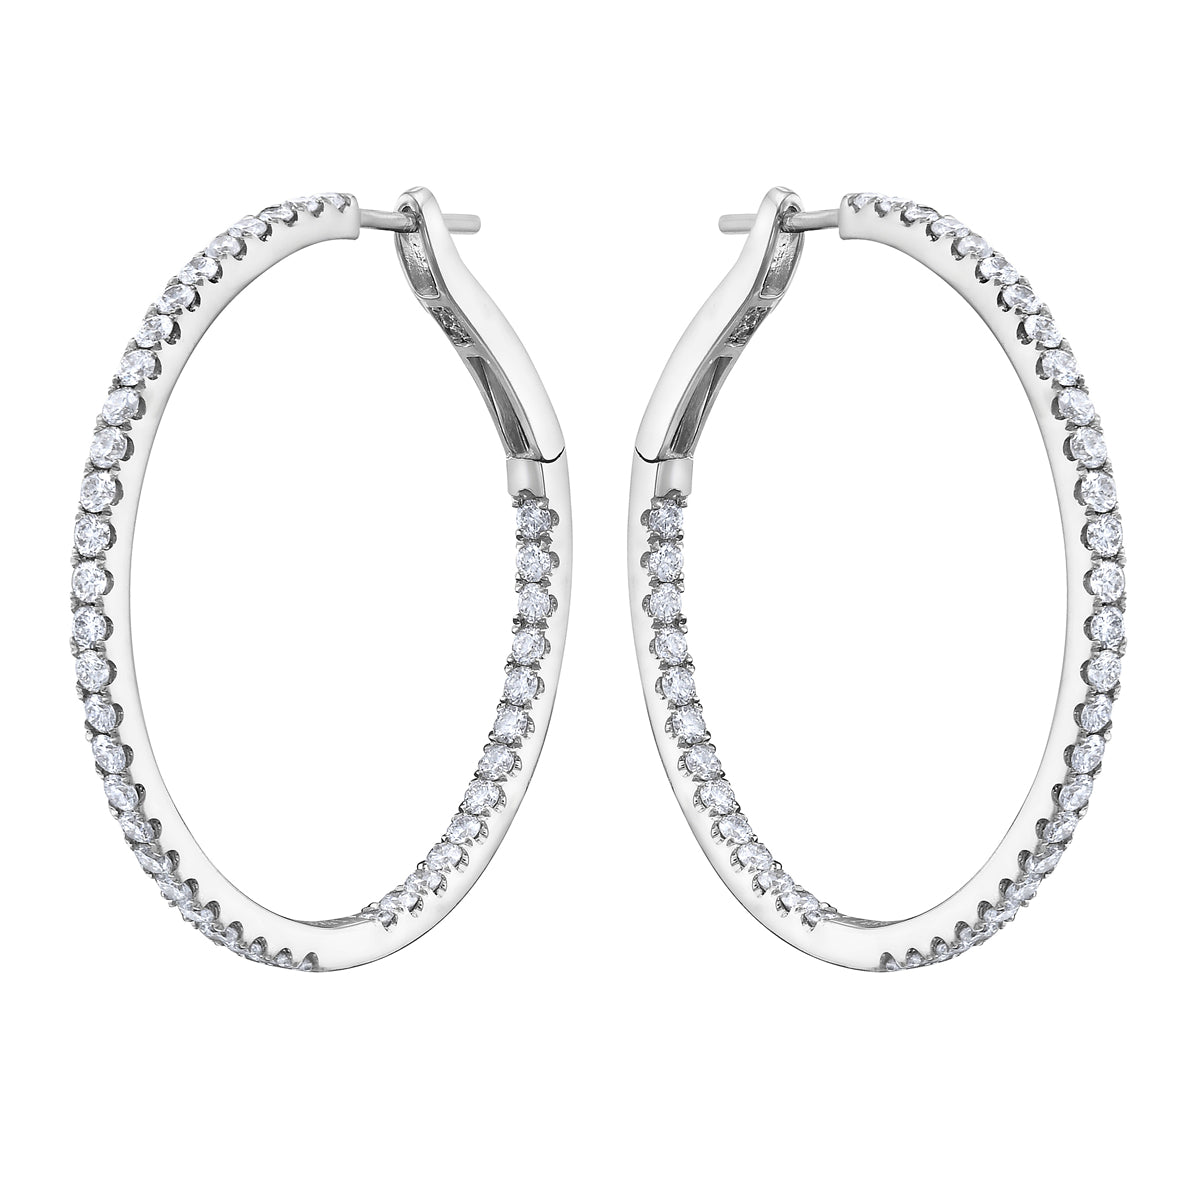 1.25 in White Gold Inside and Out Diamond Hoop Earrings